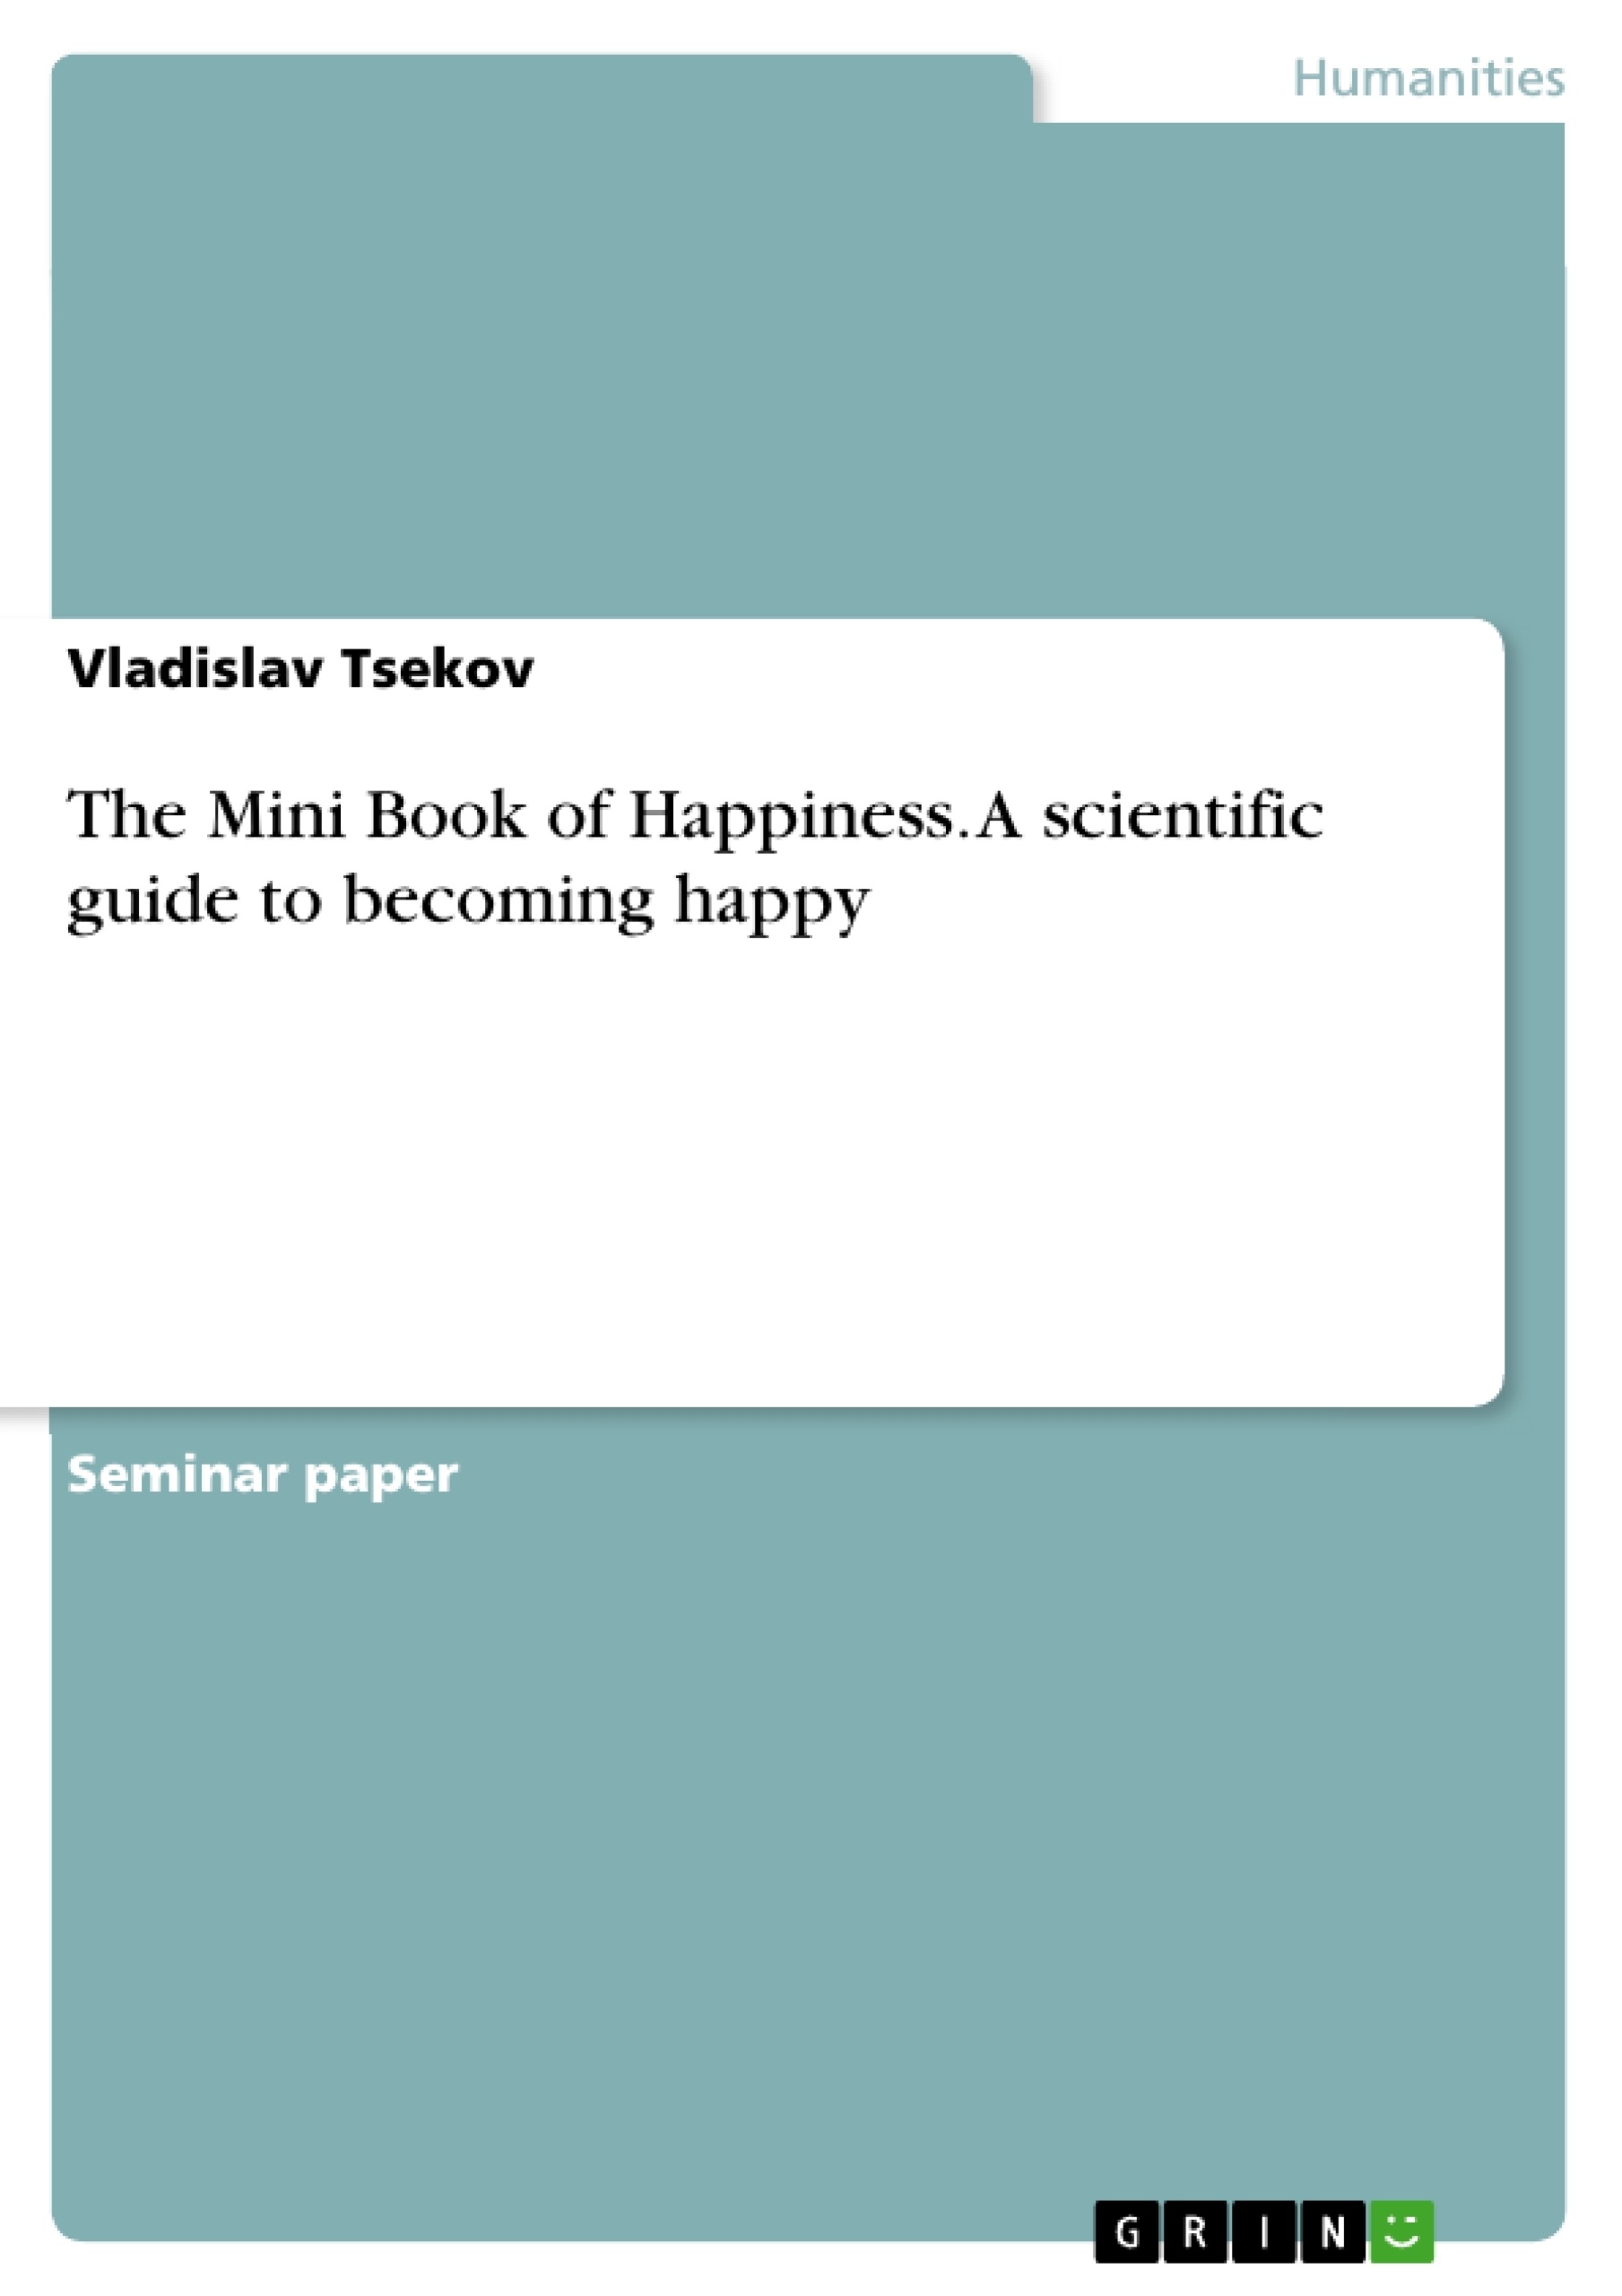 Title: The Mini Book of Happiness. A scientific guide to becoming happy